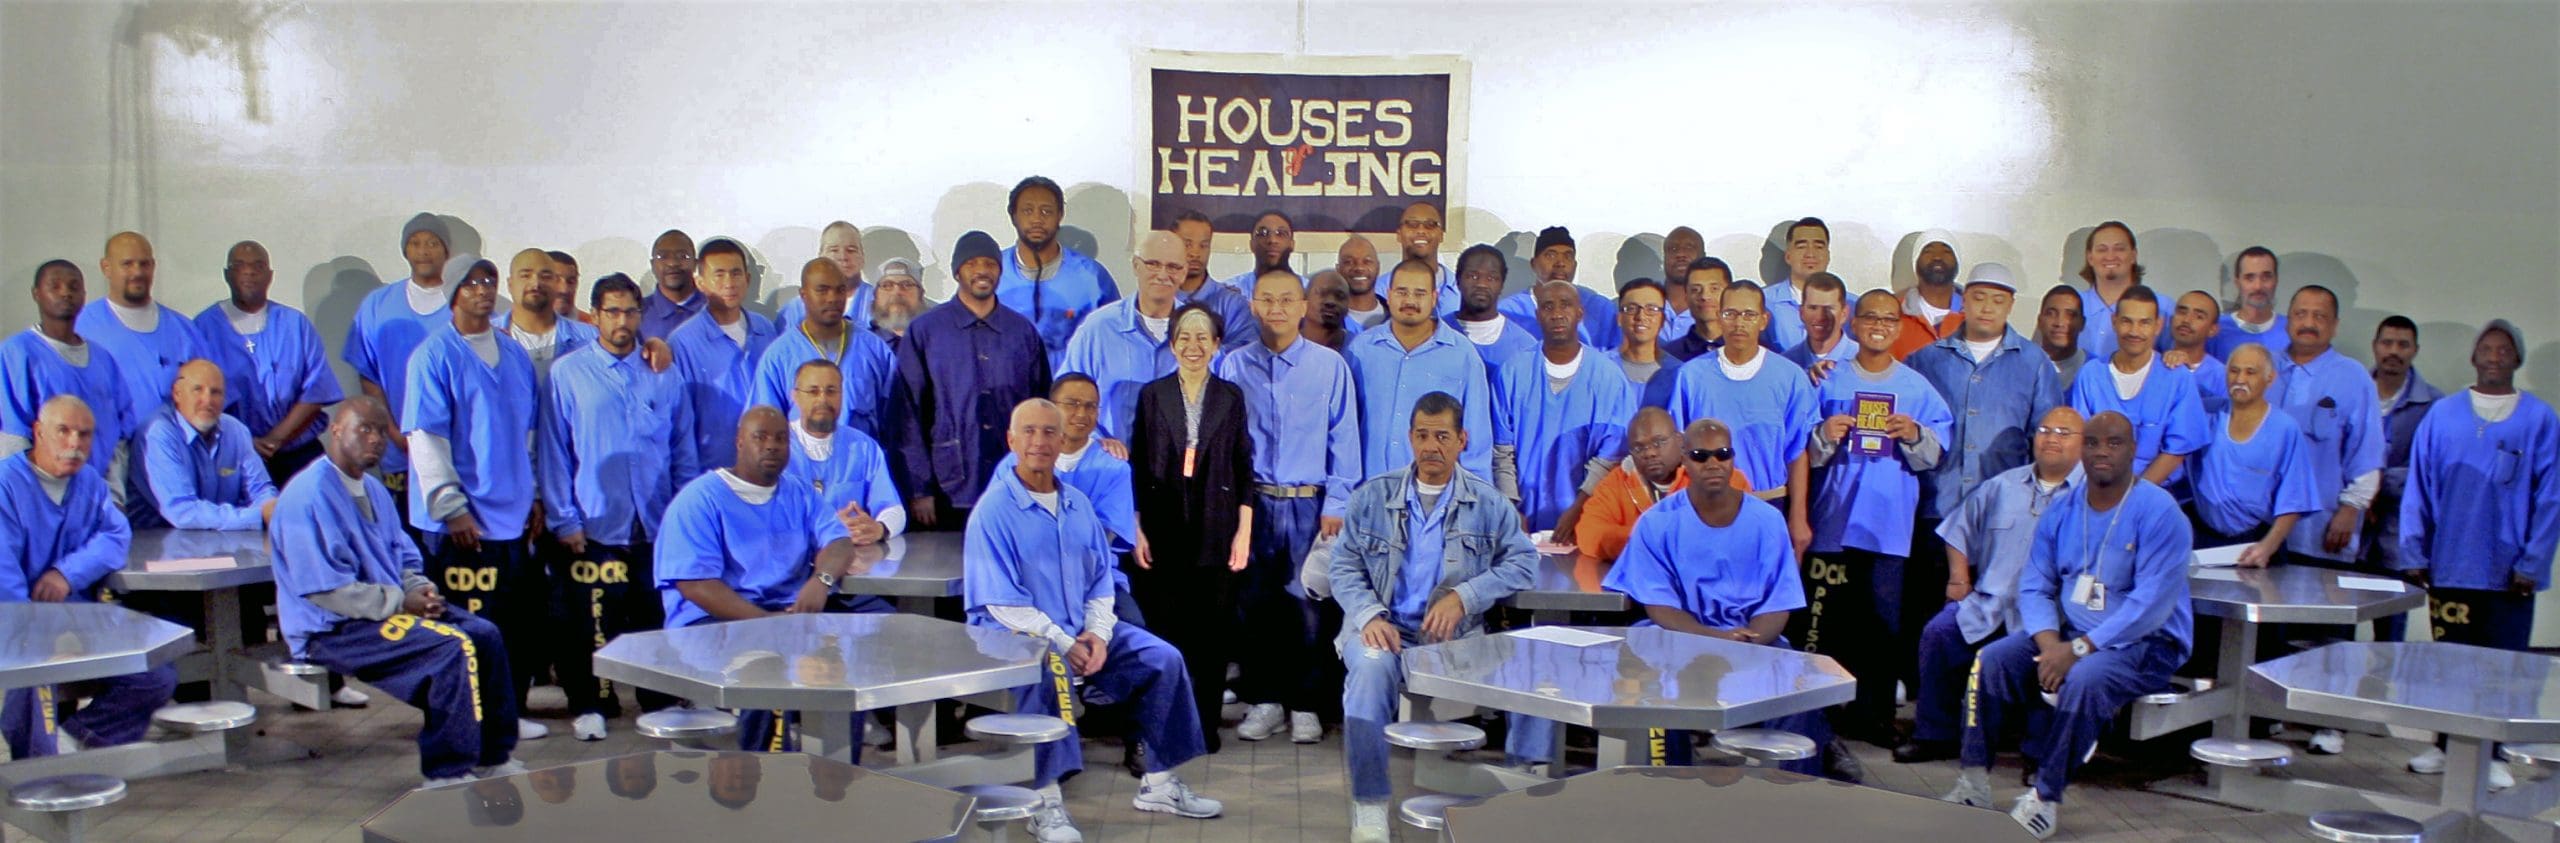 Lionheart Executive Director Robin Casarjian with Participants of Houses of Healing at California State Prison, Lancaster